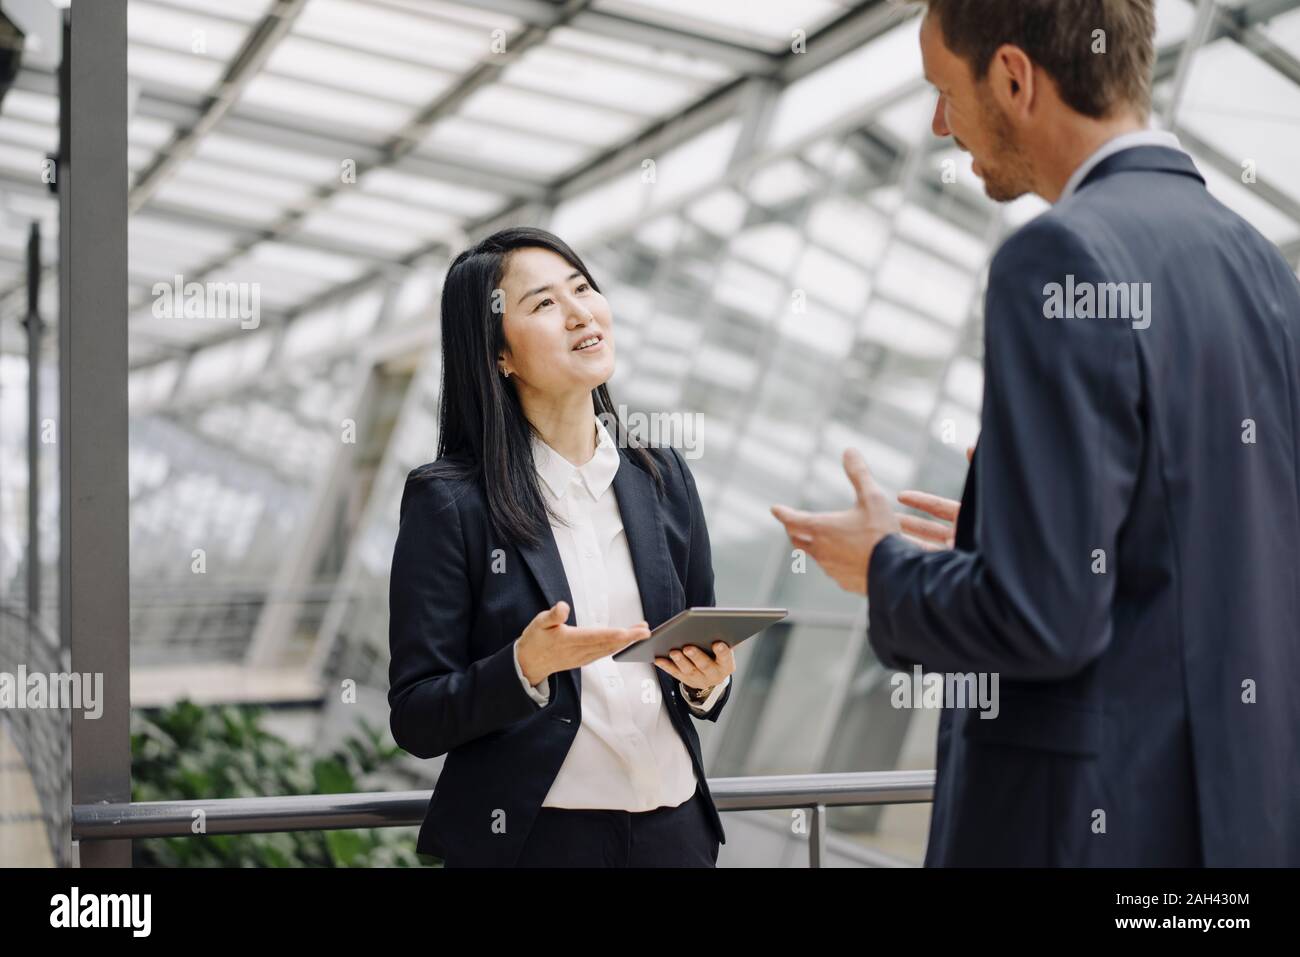 Businessman and businesswoman with tablet talking in modern office building Stock Photo